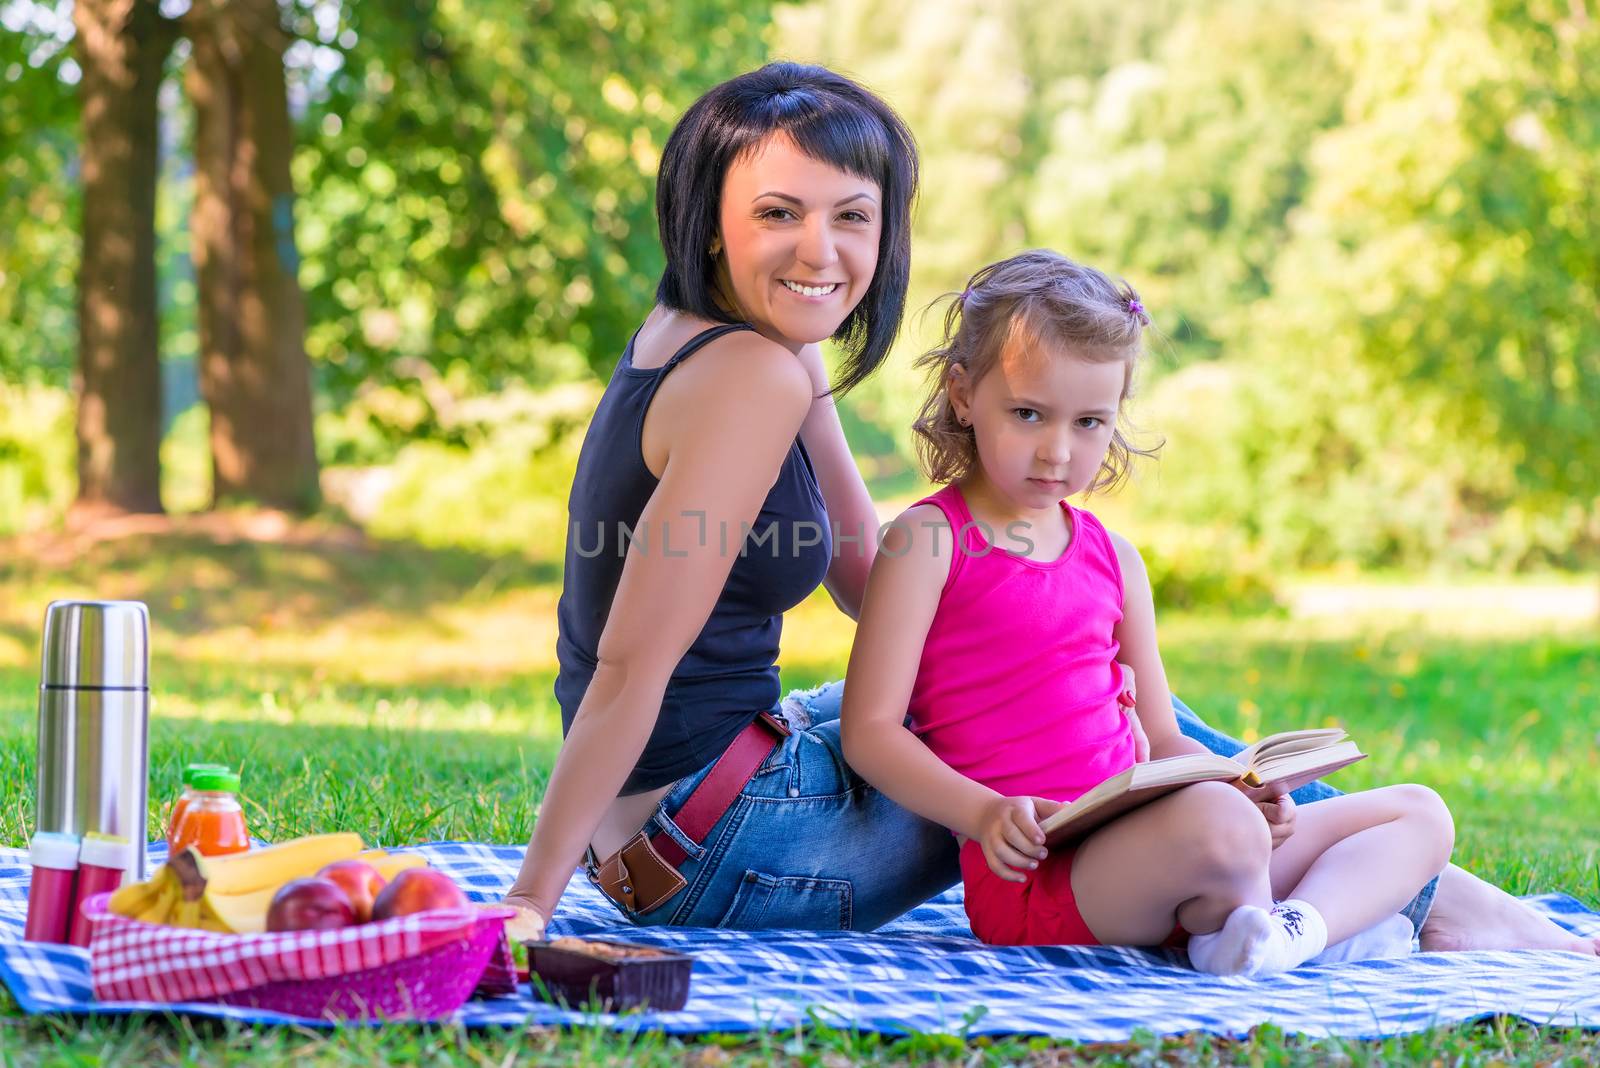 picnic in the park mother and daughter by kosmsos111